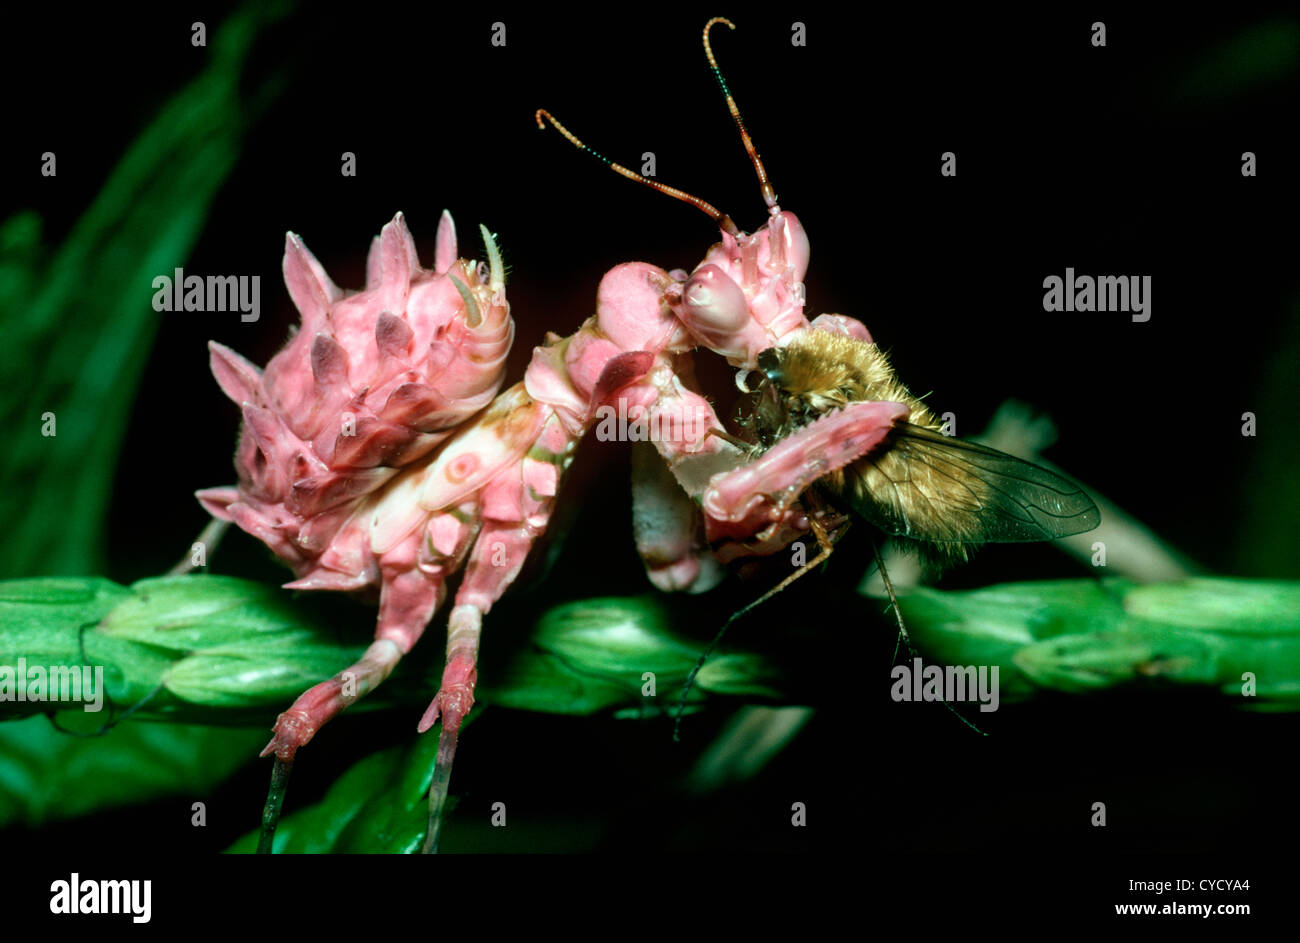 A flower mantis nymph (Pseudocreobotra ocellata) feeding on a bee fly in tropical dry forest, Kenya Stock Photo